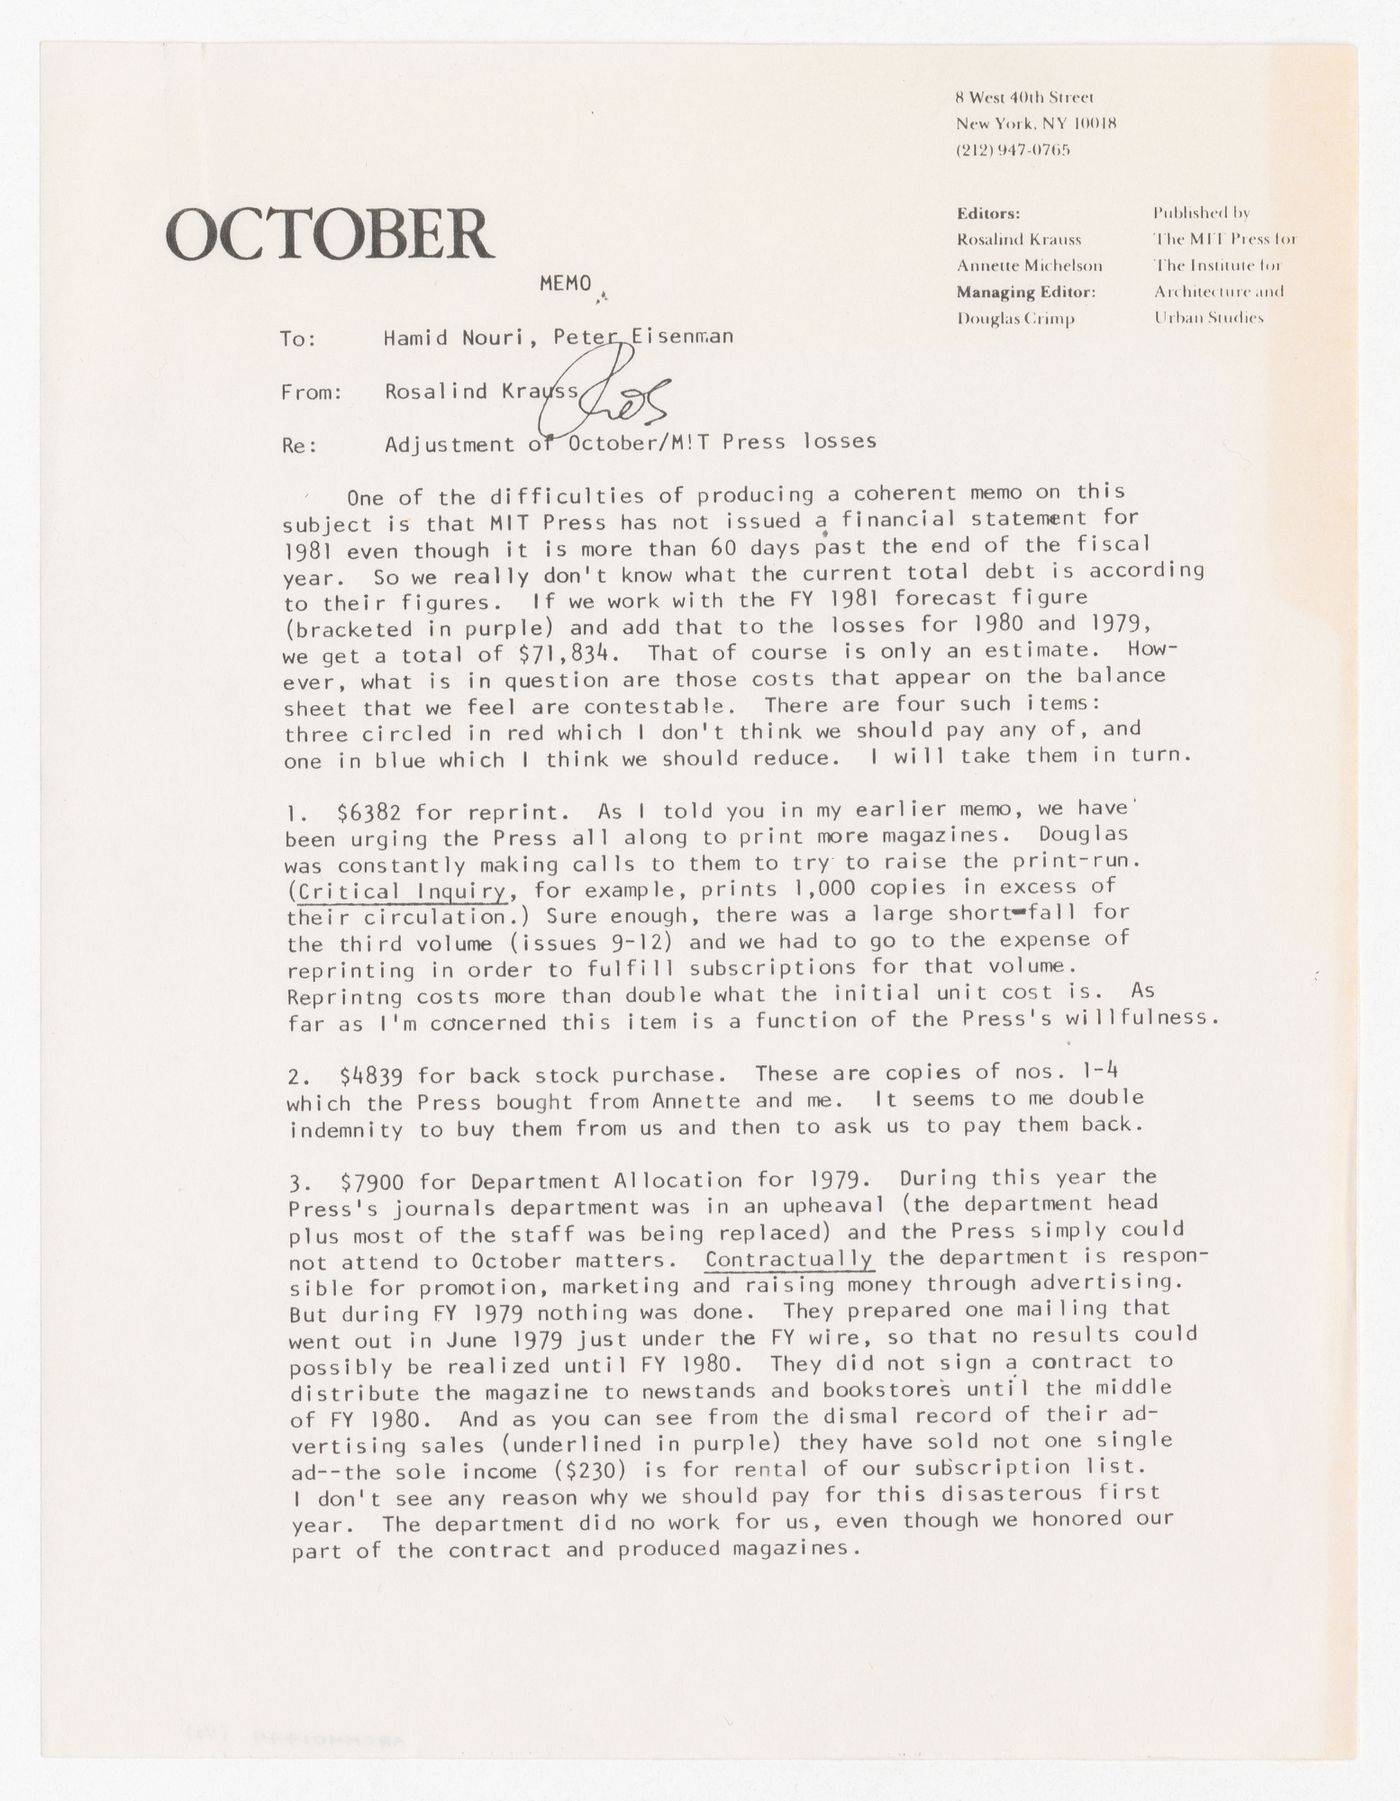 Memorandum from Rosalind Krauss to Peter D. Eisenman and Hamid R. Nouri about adjustment of October losses